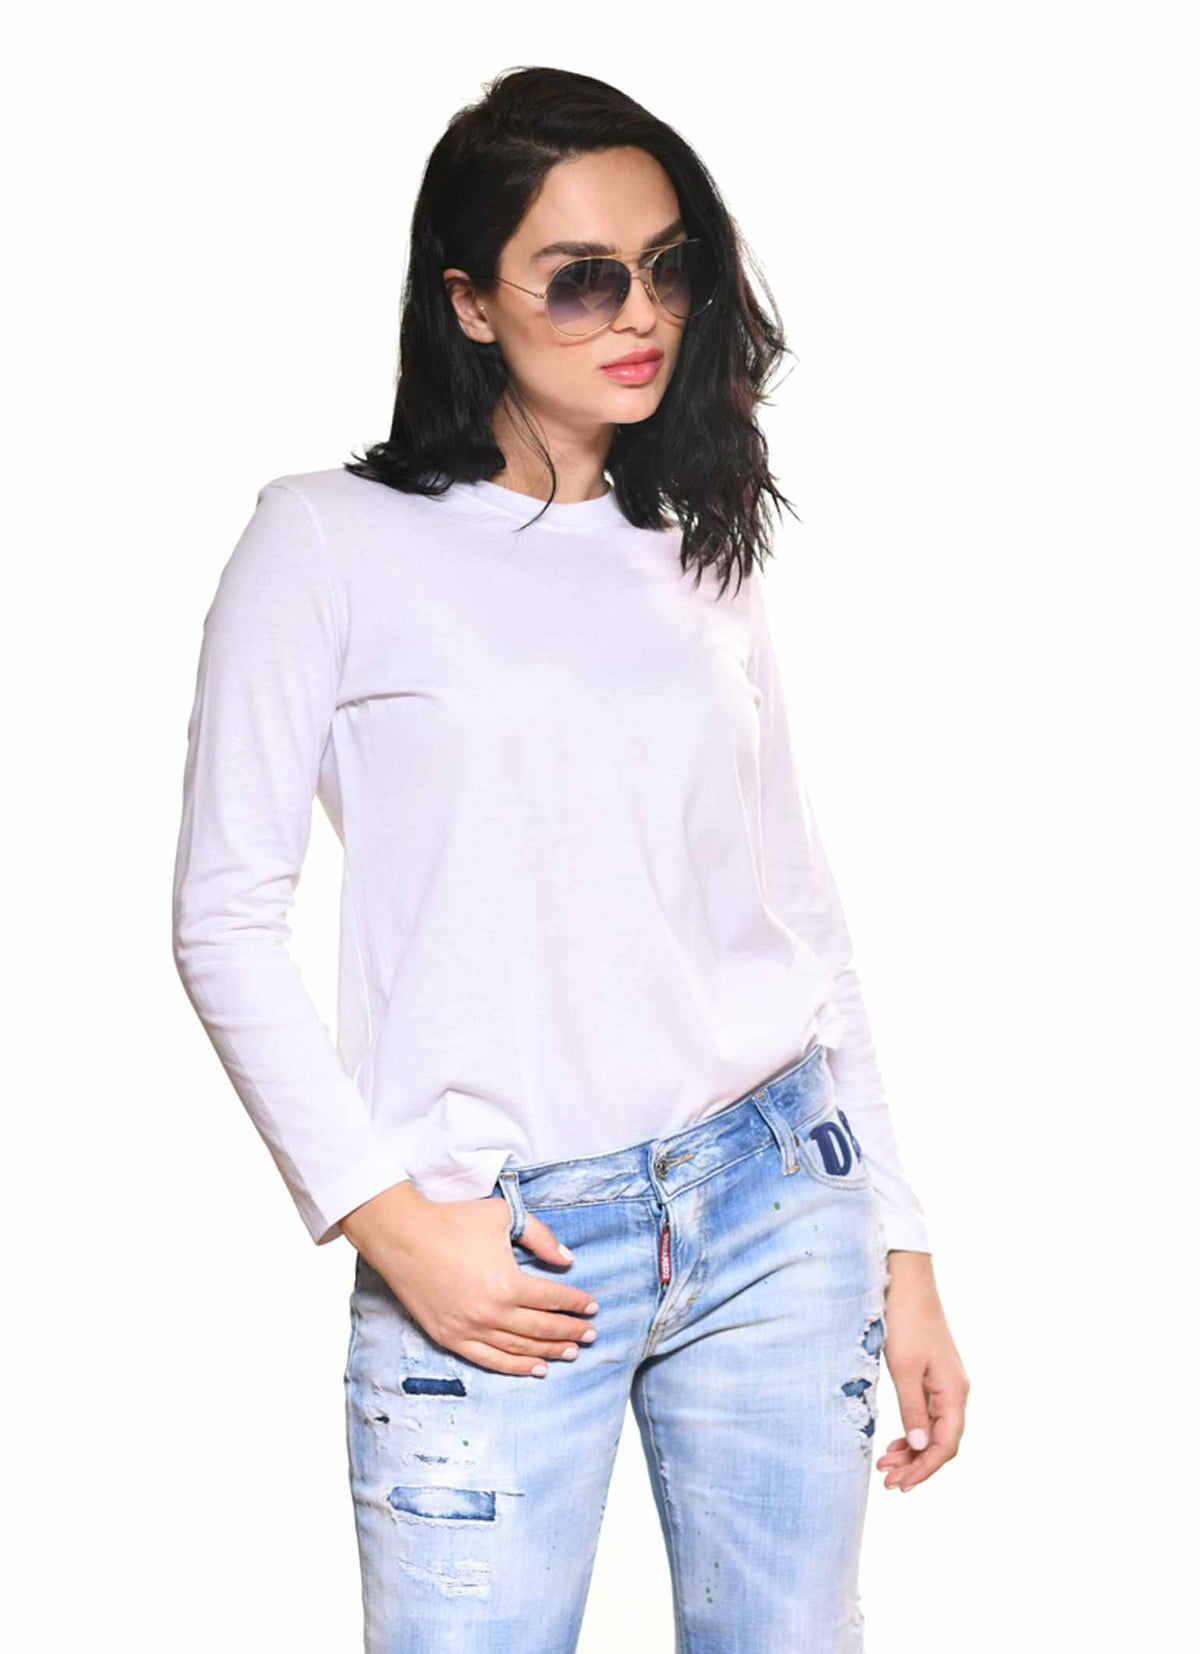 Women wearing jeans and designer sunglasses in silver frames and dark gradient color lenses and white best long t-shirt soft italian cotton